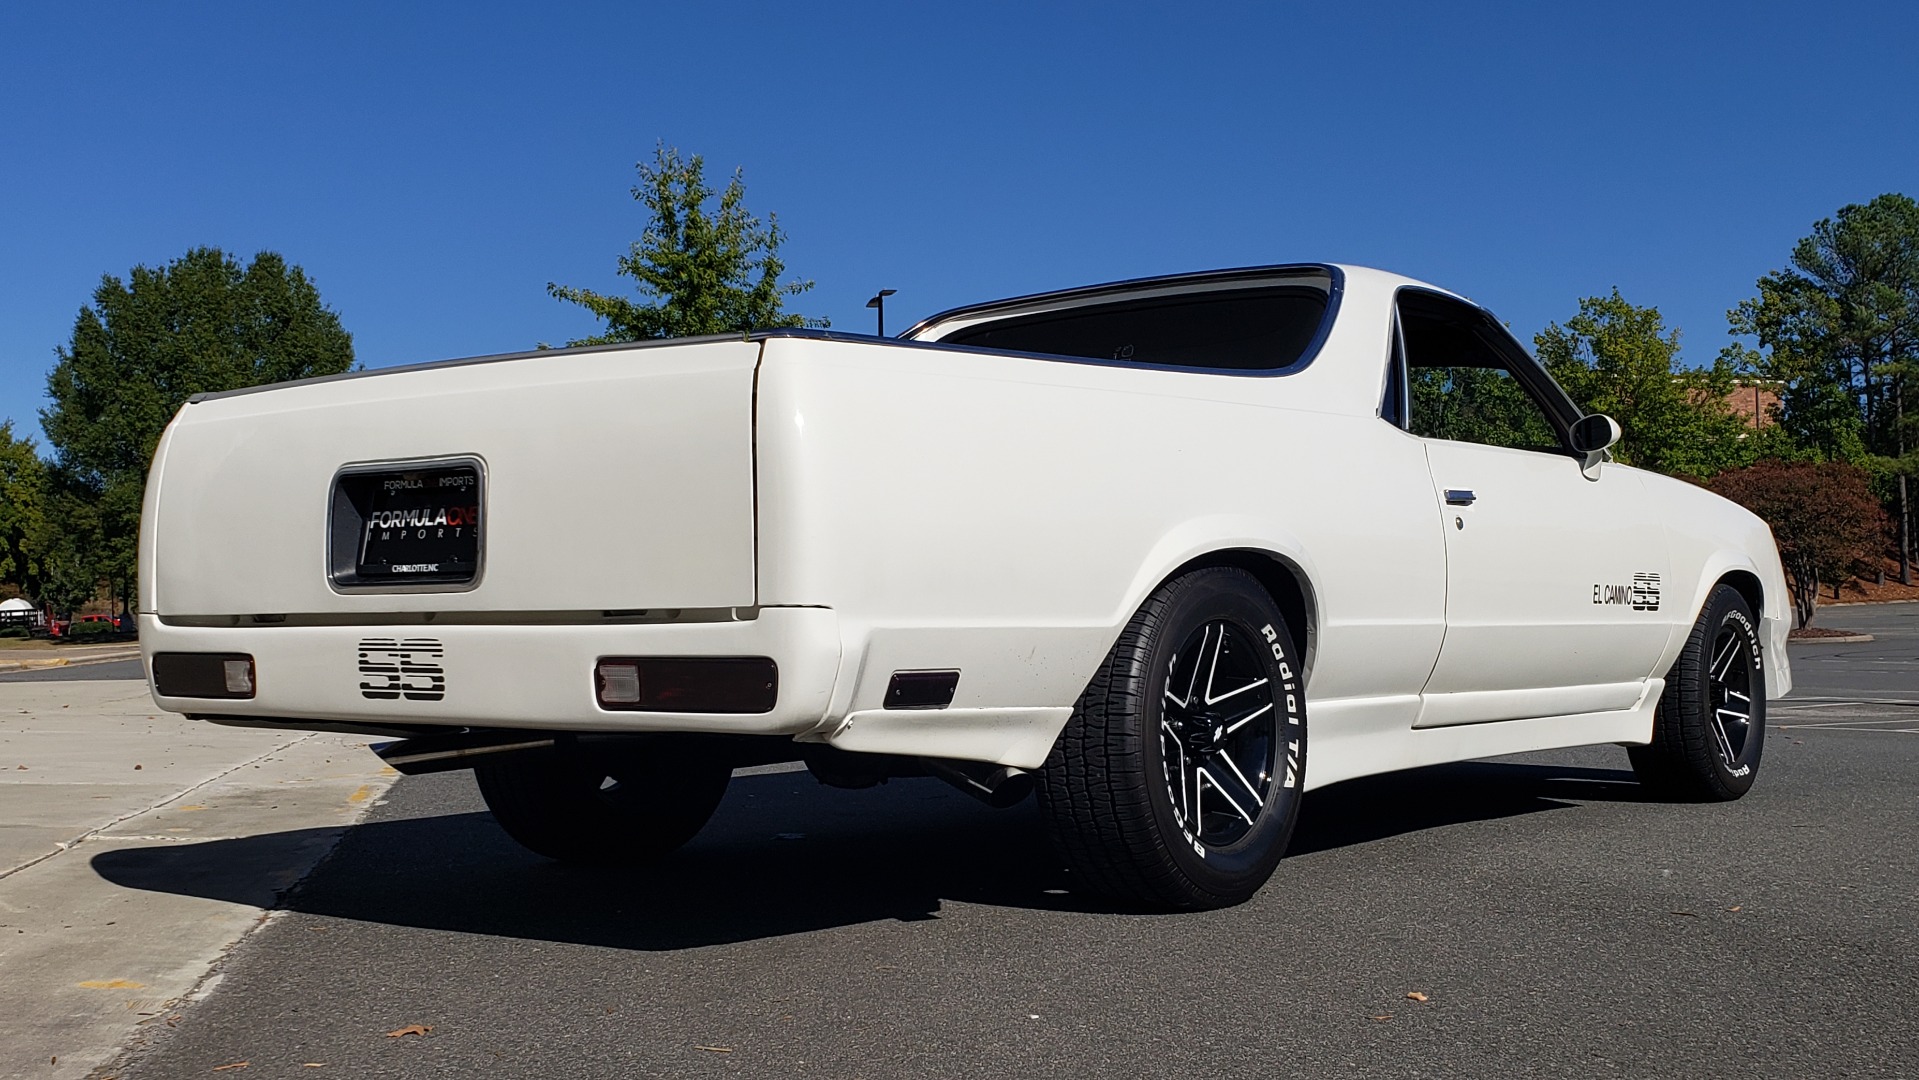 Used 1979 Chevrolet EL CAMINO SS / NEW 350 V8 / AUTO / COWL HOOD / CUSTOM SOUND / FLOWMASTERS for sale Sold at Formula Imports in Charlotte NC 28227 4